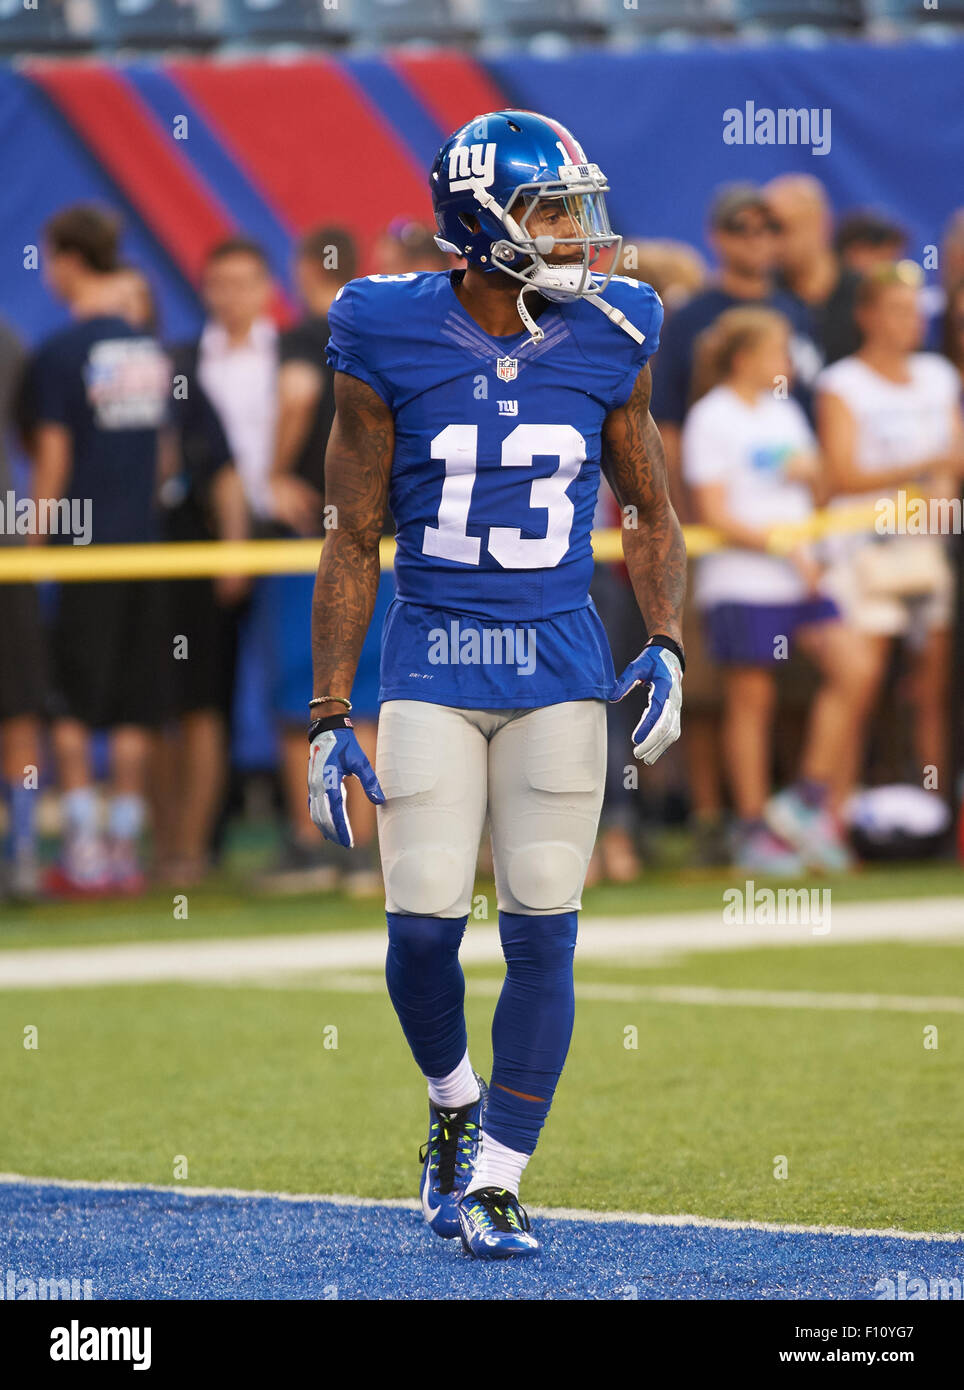 Aug. 24, 2015 - East Rutherford, New Jersey, U.S. - Giants' wide receiver  Odell Beckham, Jr (13) during warmup prior to preseason action between the  Jacksonville Jaguars and the New York Giants